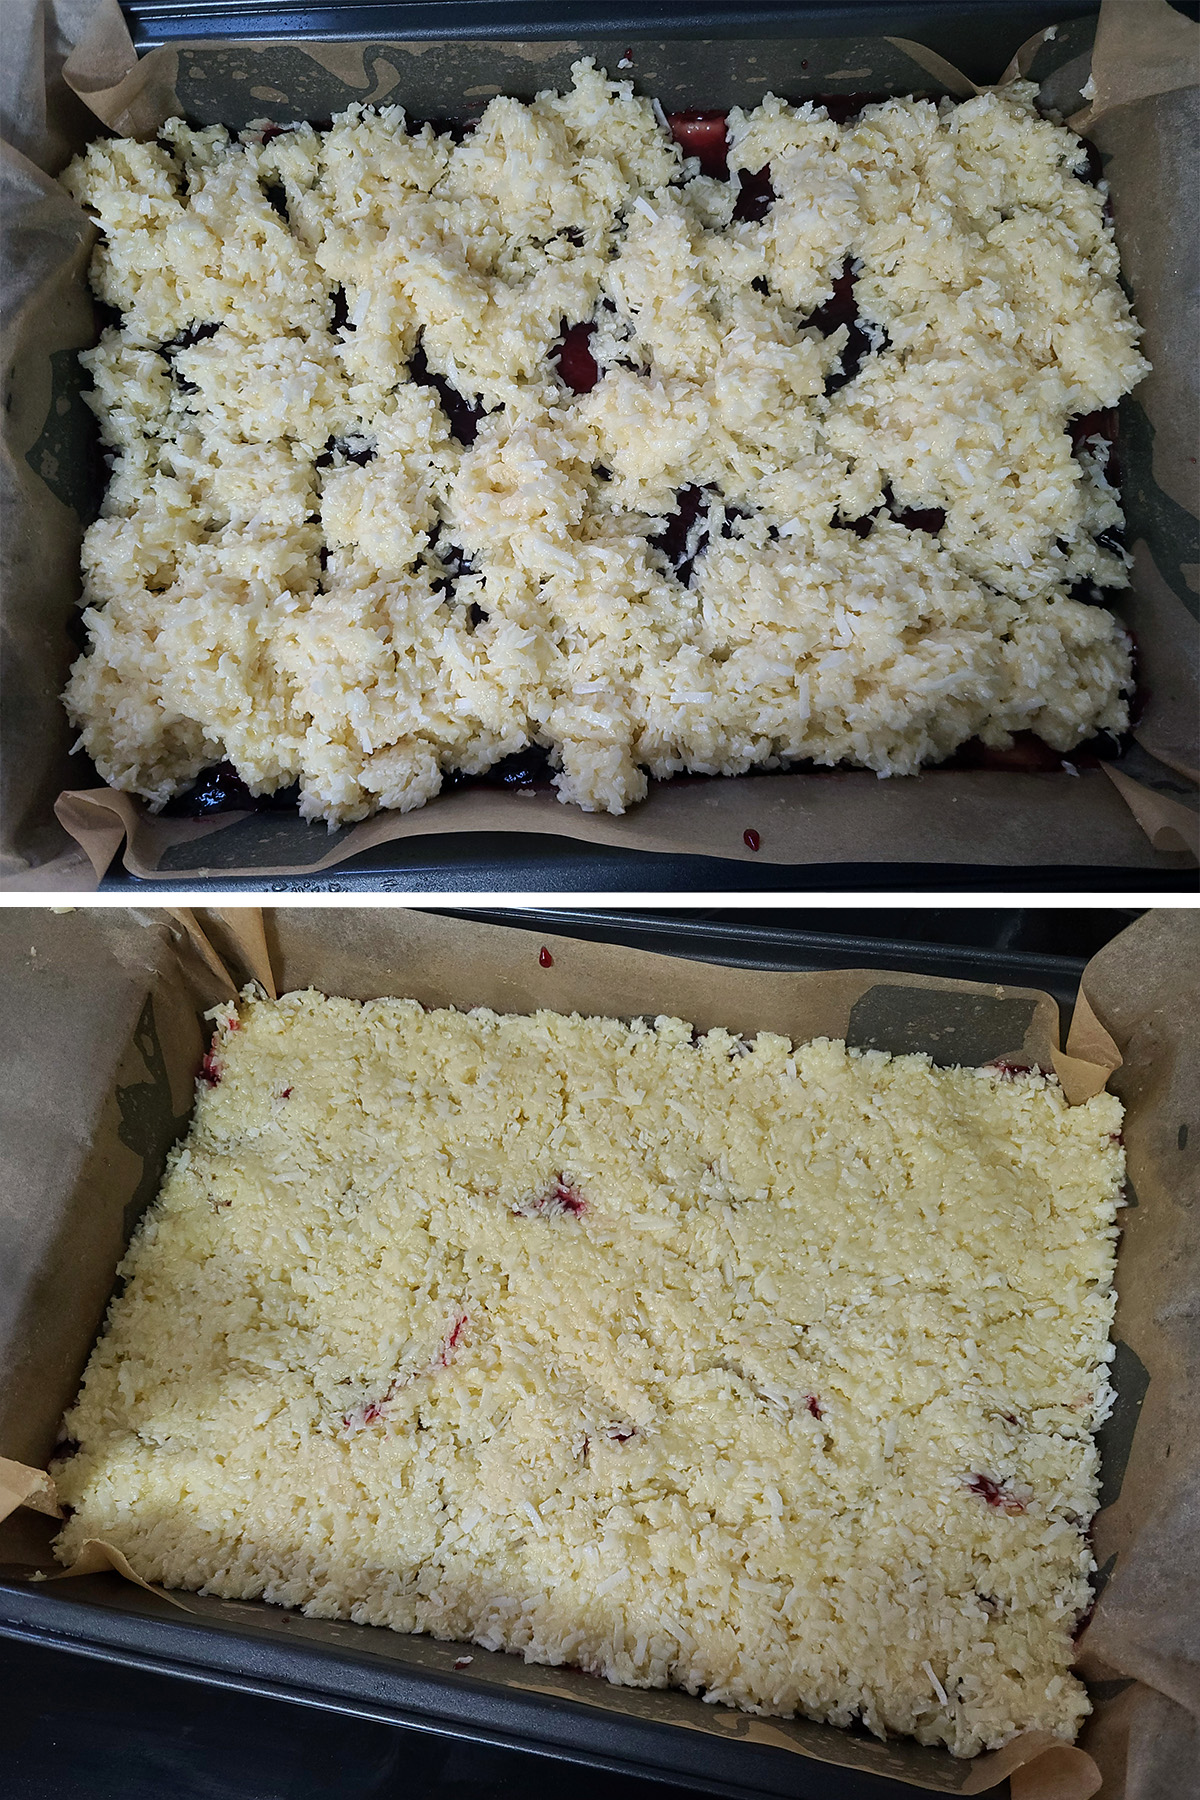 A 2 part image showing the coconut topping being spread out over the raspberry jam and flattened slightly.